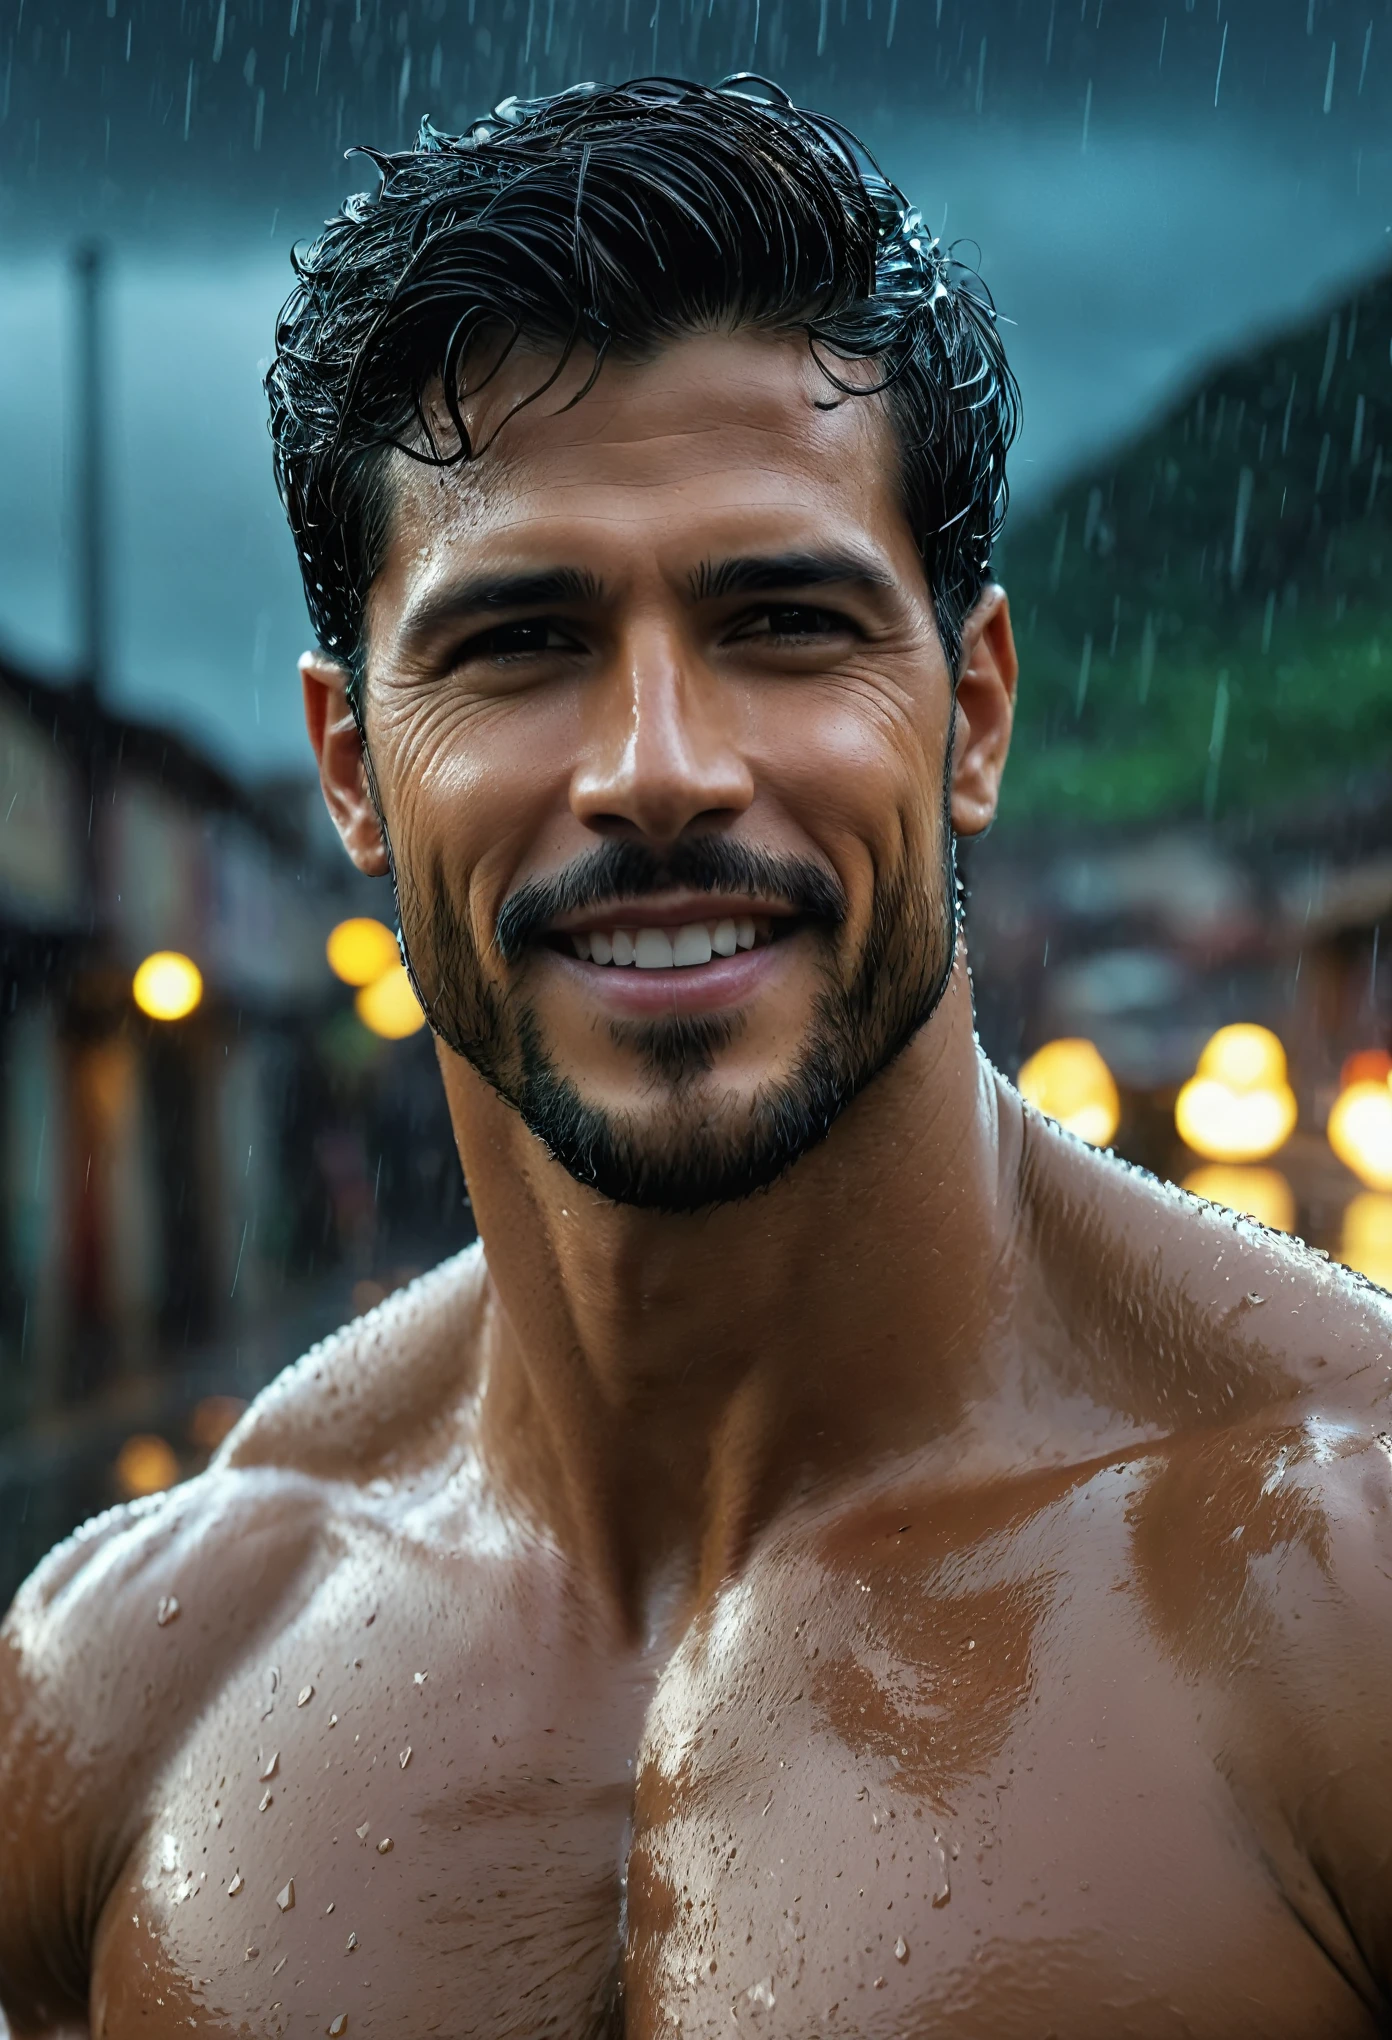 realist:1.3,( fotorrealist, 8k, RAW Photos, Premium quality, Masterpiece, epic lighting. close up, Centered image), (foreground),((1 beautiful man beautiful smile, self-confident well-formed muscles, Post Apocalyptic, Guerrero, Perfectly detailed face and body, (foreground), rainy scene, poor lighting due to rain,(( face and body wet from the rain:1.5)),lightning lighting, dynamic pose, beautiful and detailed hair, Leather Clothes)), ((Imaginative scene)),((perfect, meticulously detailed.:1.3)), ((full shot: 1.4)), ((best quality )), ((masterpiece)), 3D, (hyper detailed: 1.3), ((Epic Scenery: 1.3)), ((night background: 1.3 ))), (((night:1.2))), ( Photorealistic: 1.4), ((Front camera)),( (Low-light night cinematic lighting: 1.2)). 32